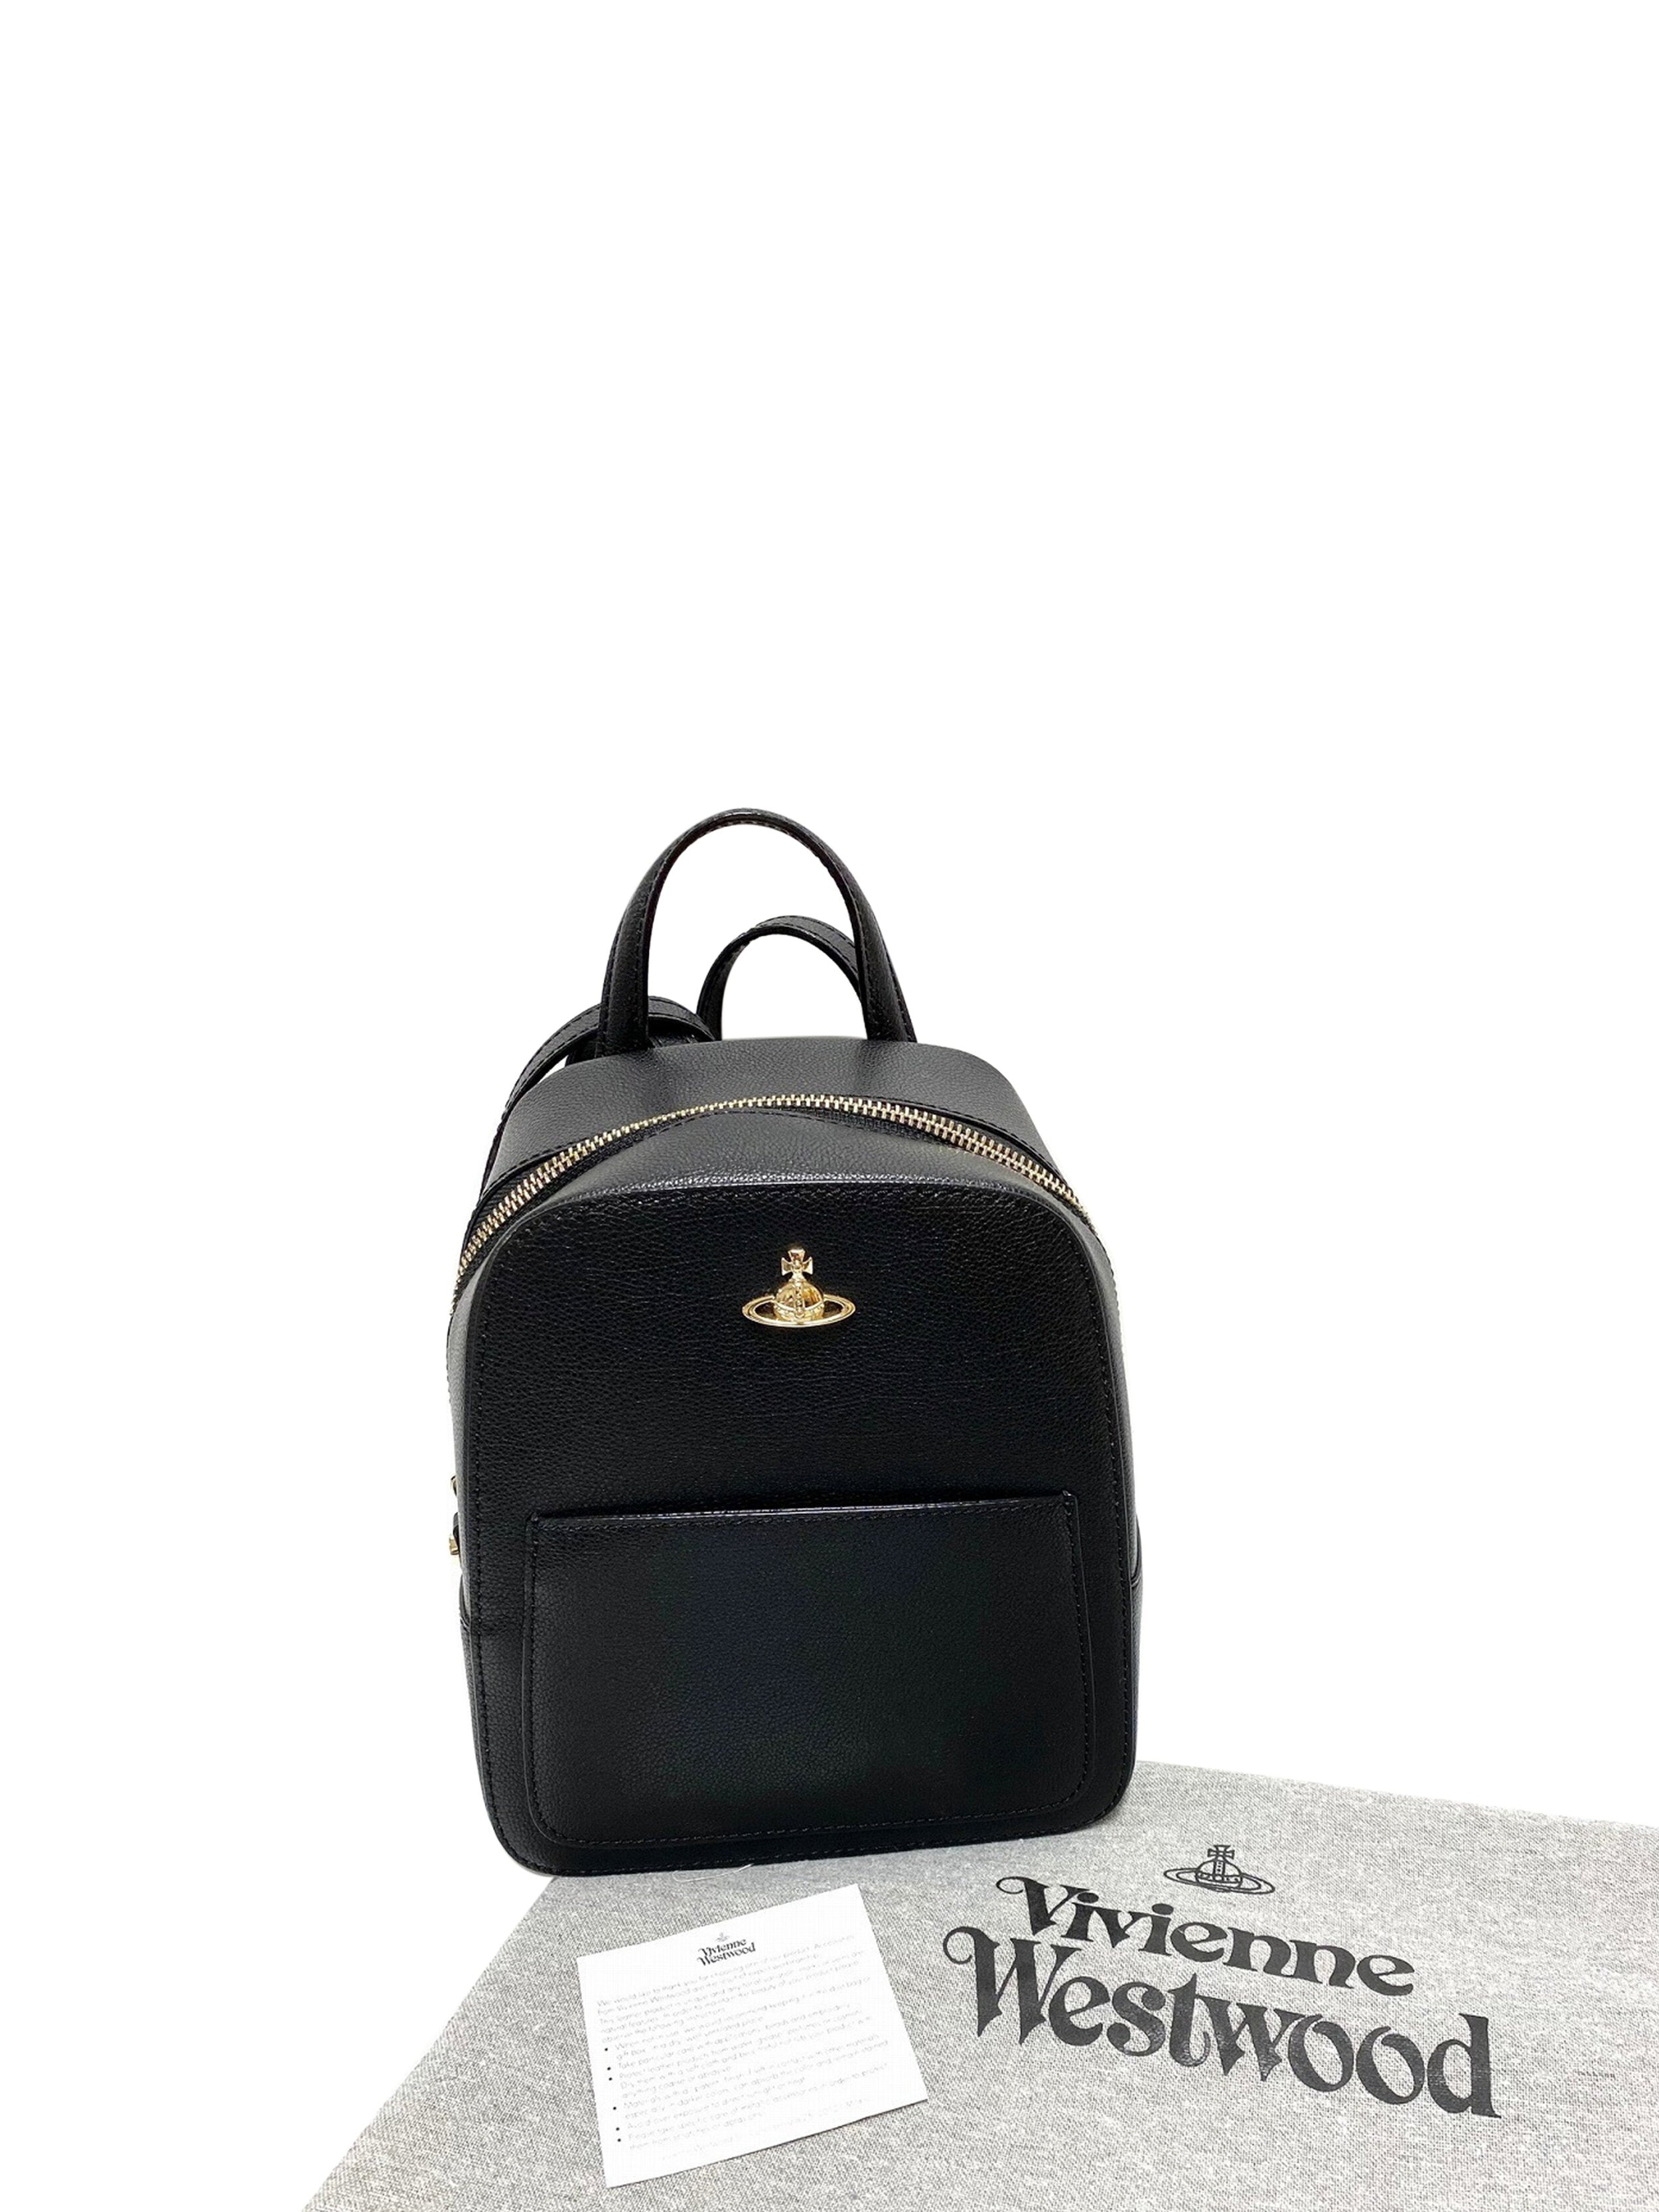 Vivienne Westwood 2000s Black Small Leather Backpack